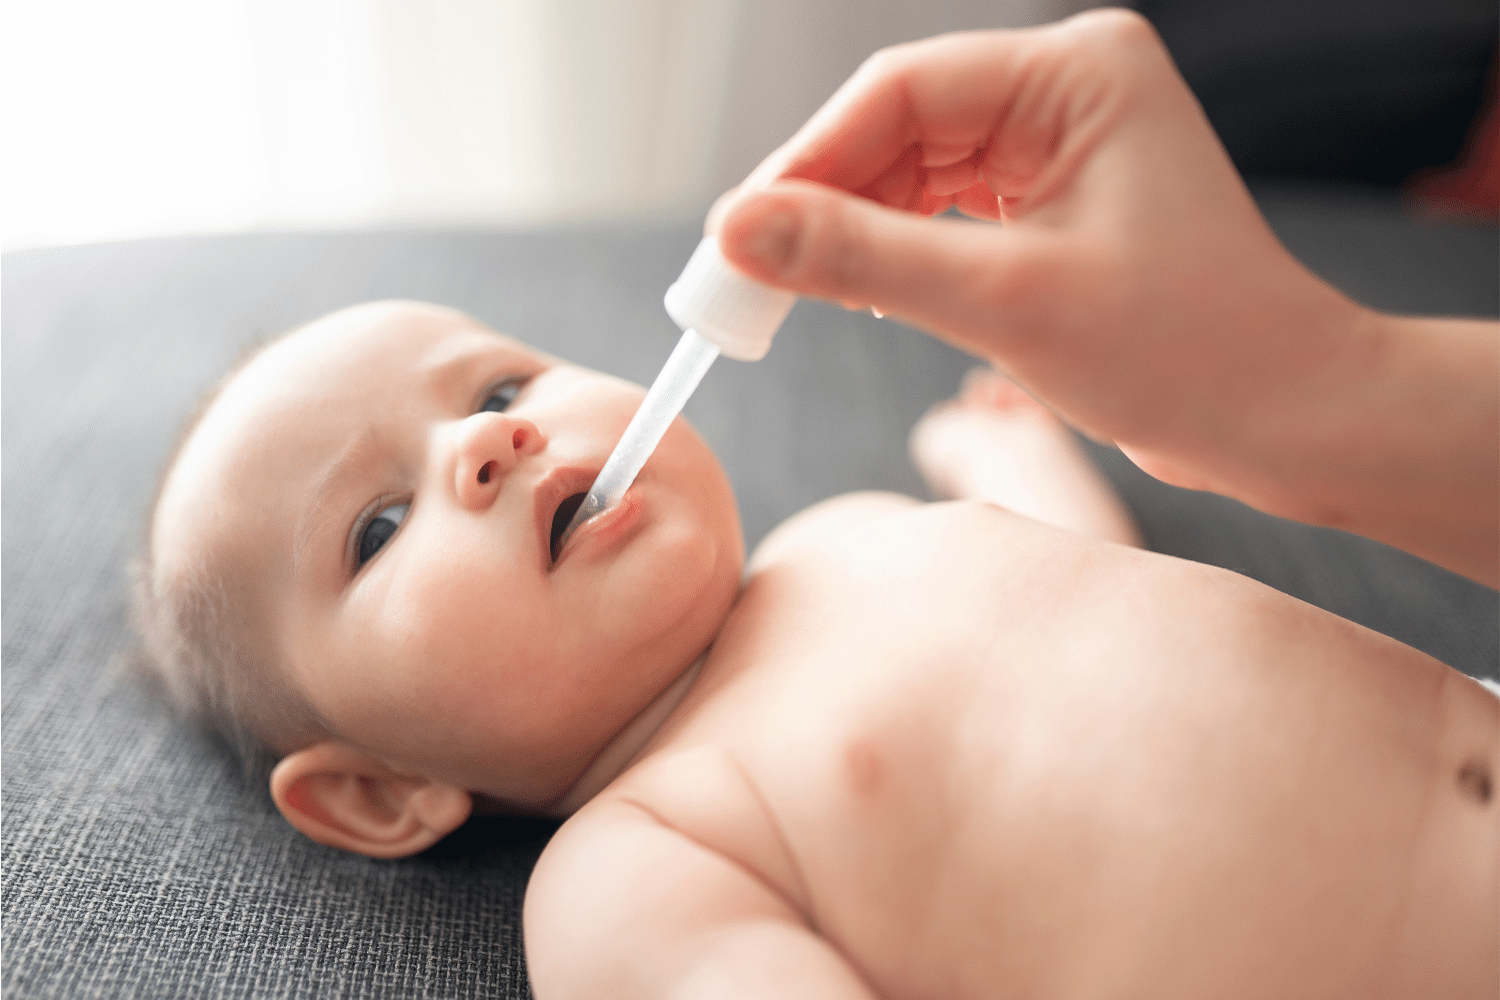 How To Find The Best Vitamin D For Infants Online